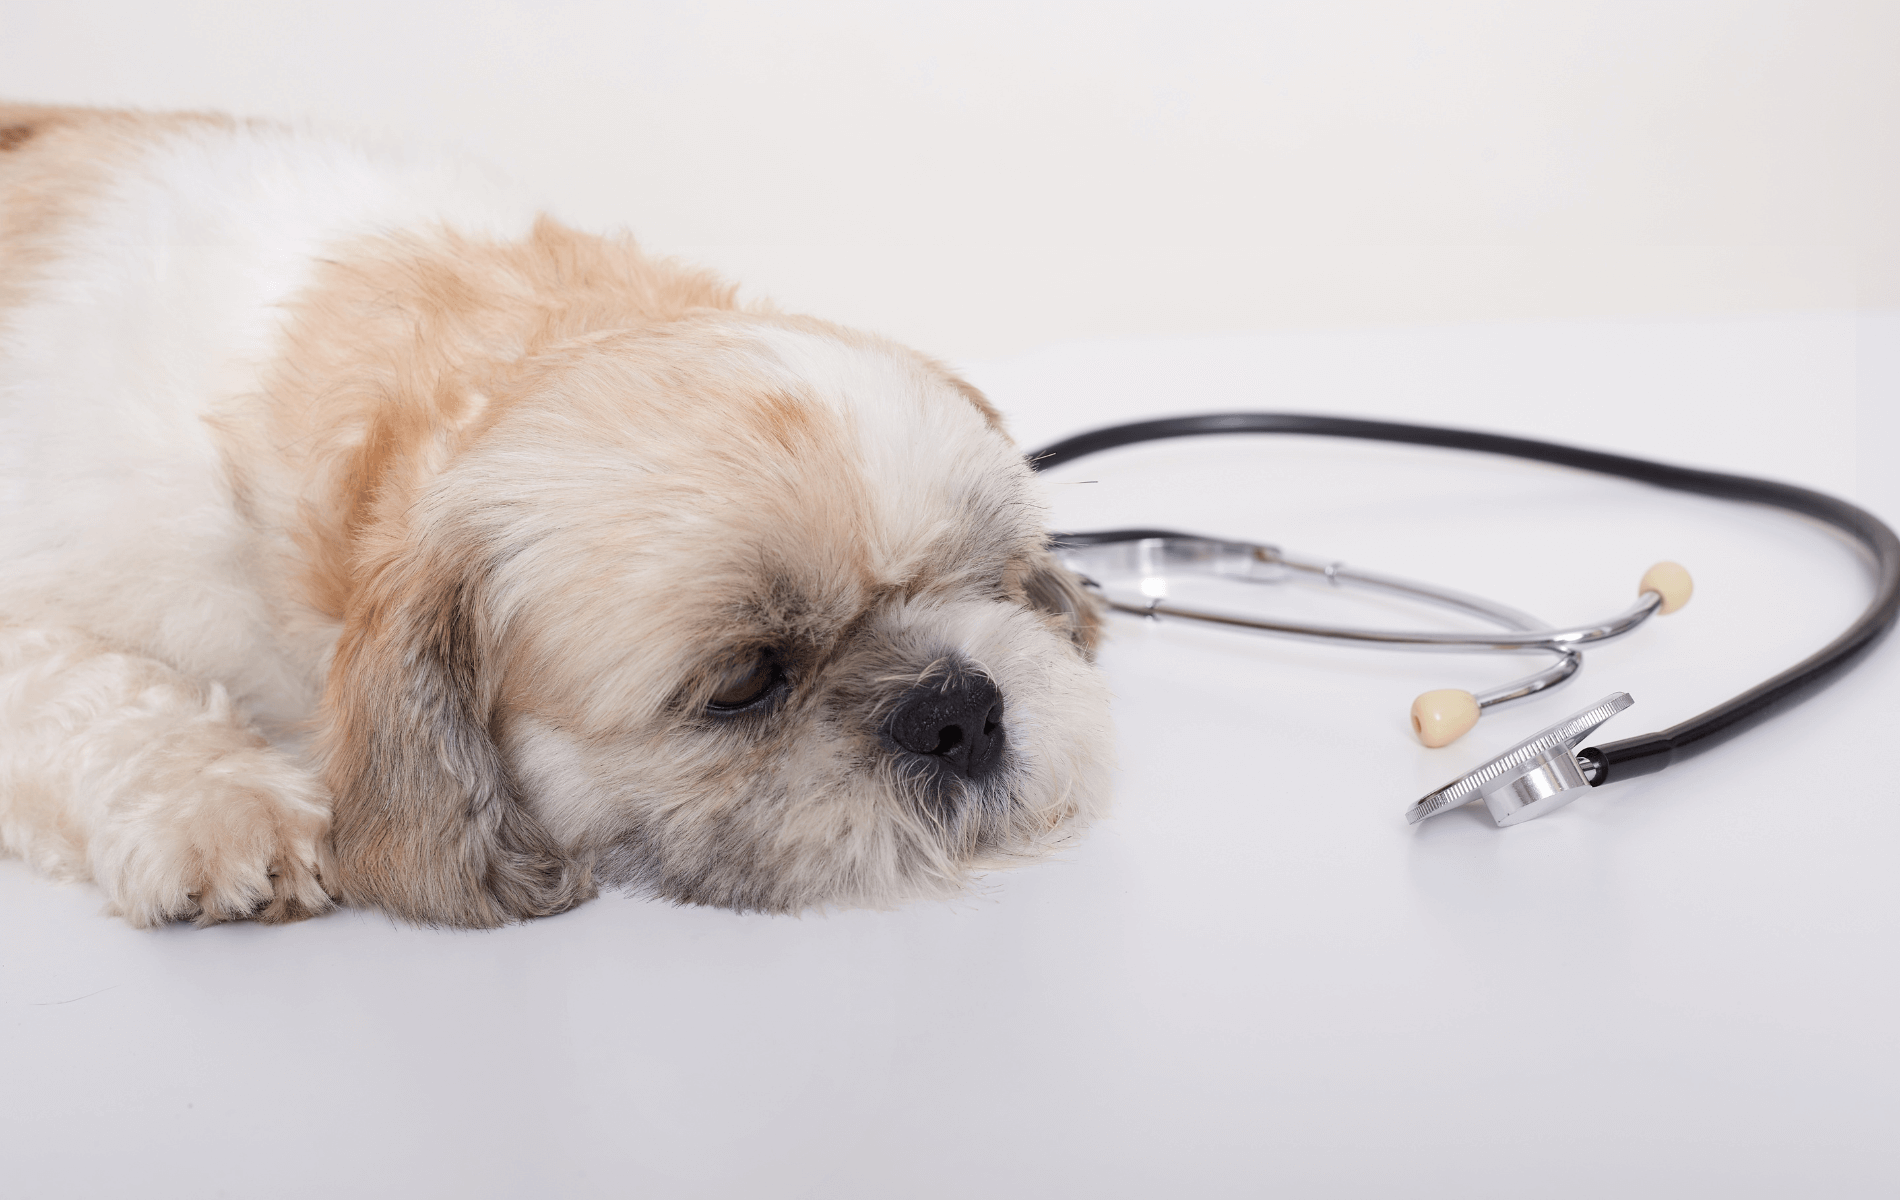 A dog lying on a table next to a stethoscope